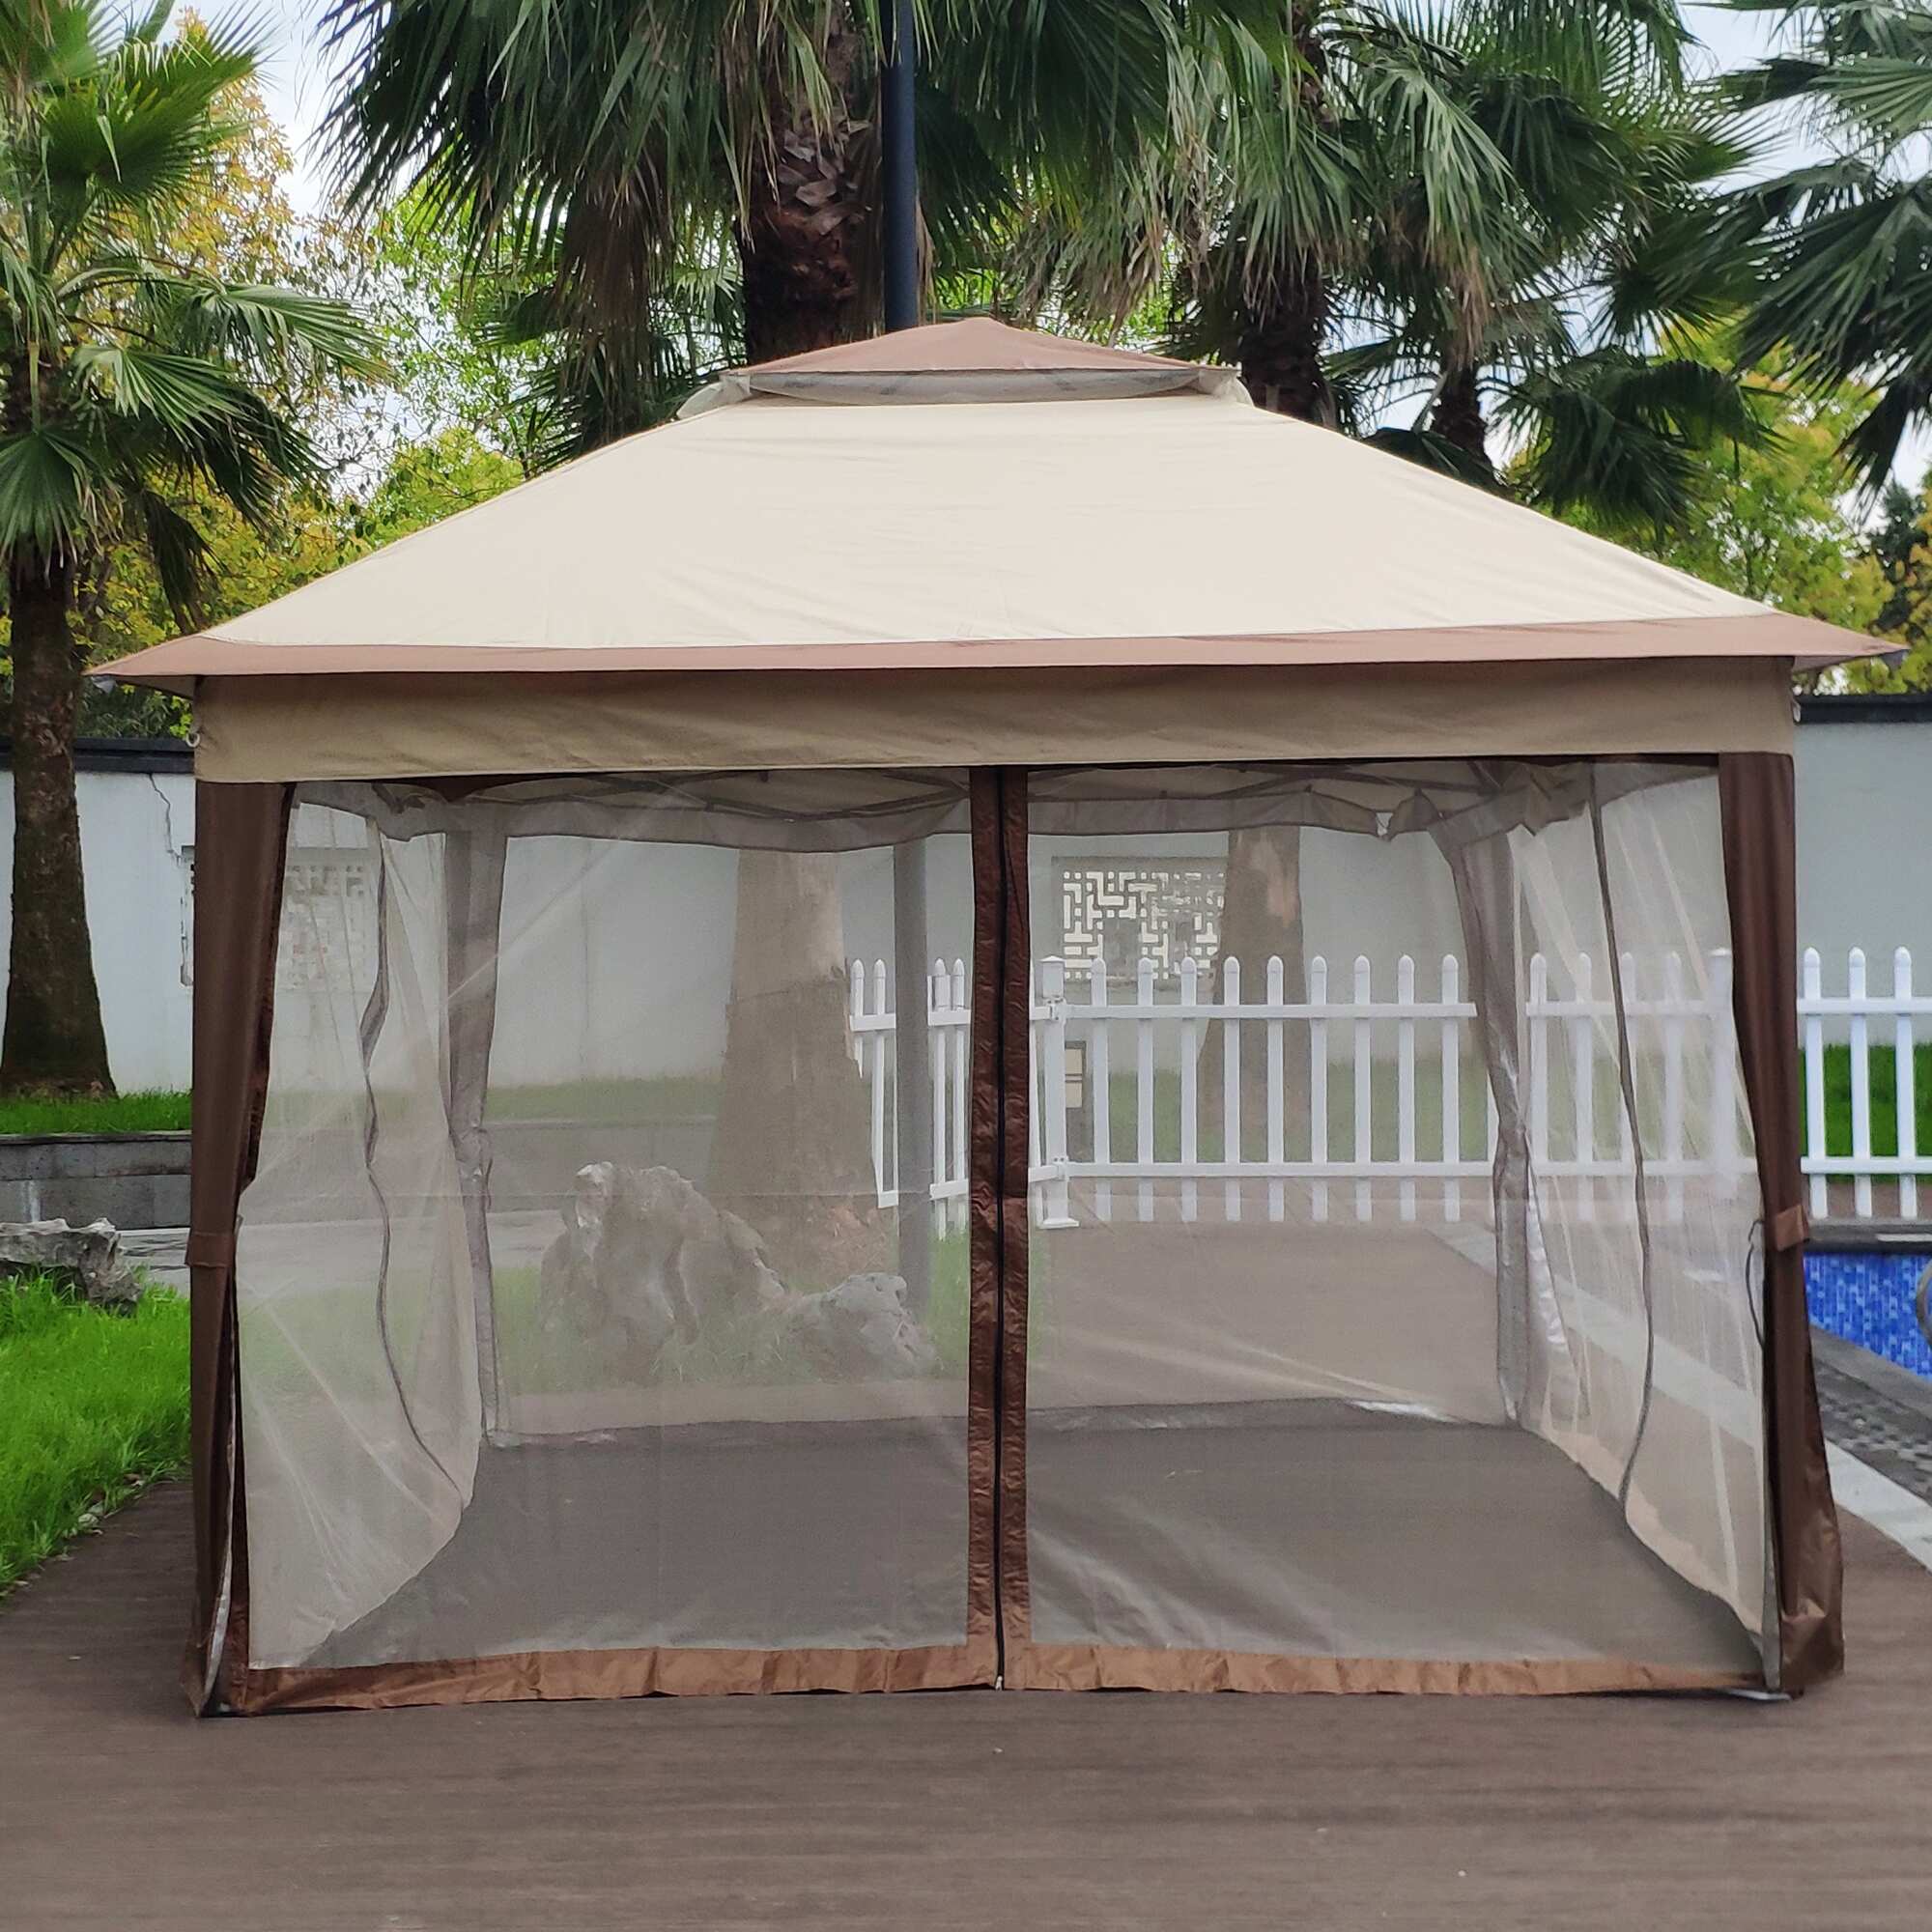 11ft x 11ft Gazebo Canopy with Removable Zipper Netting, 2-Tier Soft Top Event Tent for Patio, Backyard,Coffee